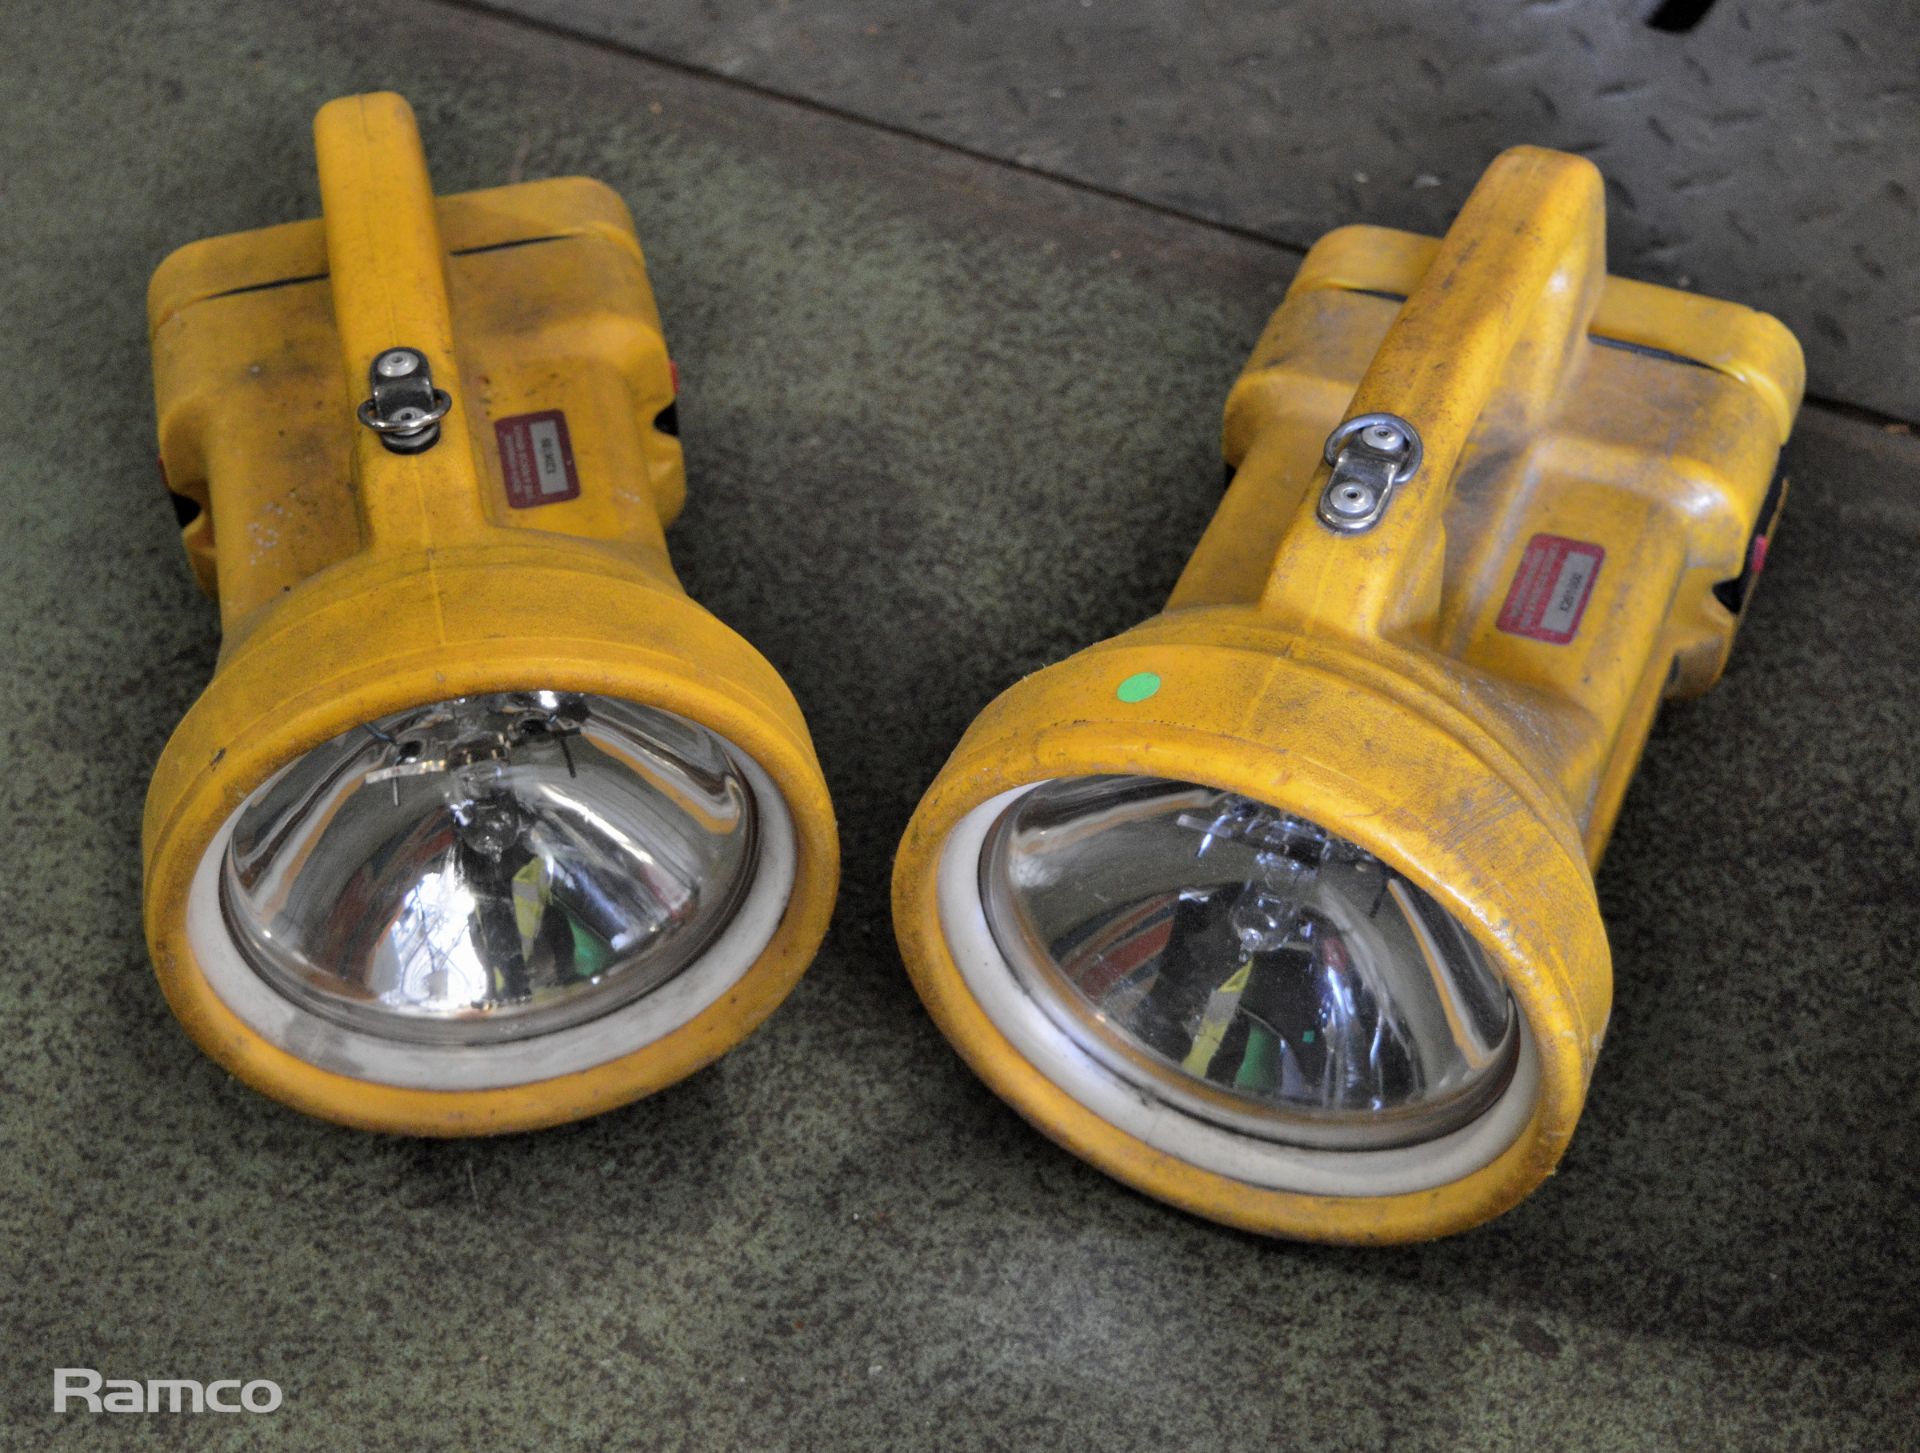 4x Emergency safety lamps x4 - Image 4 of 5